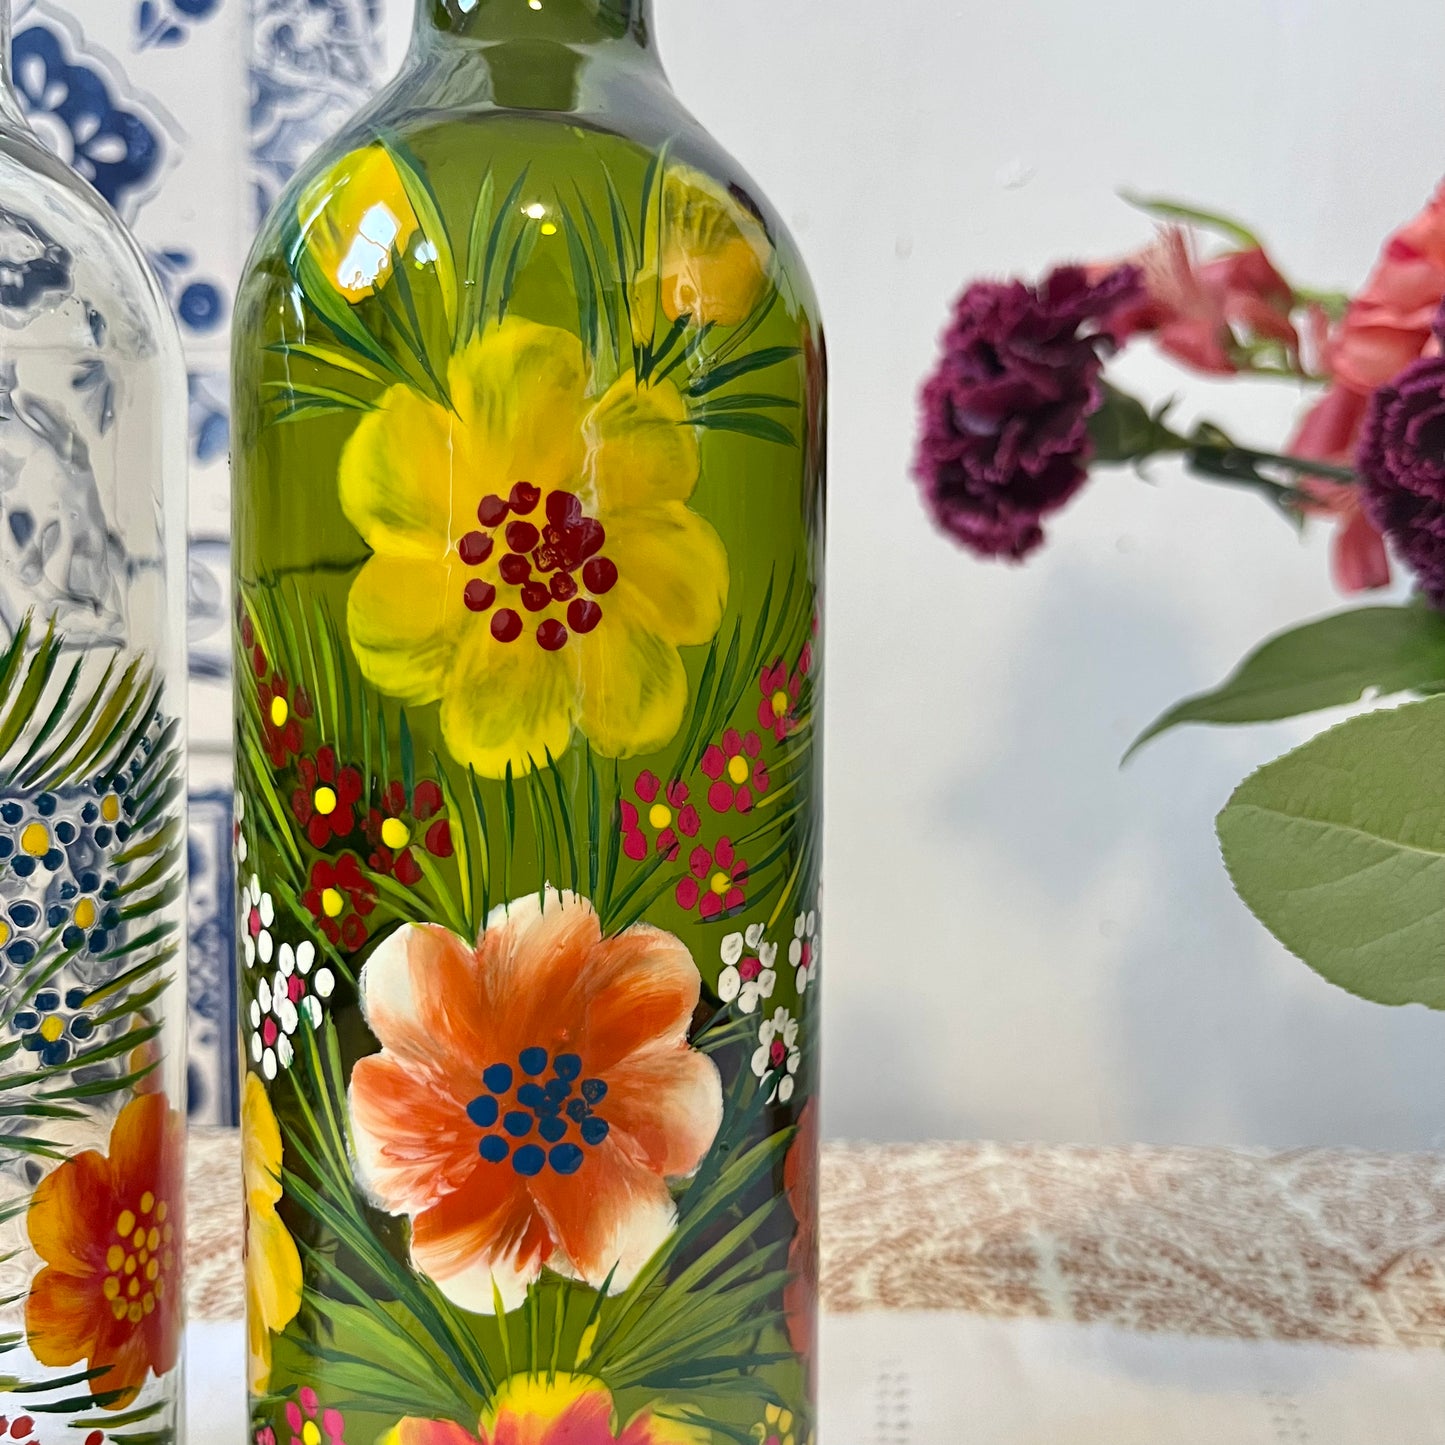 Maximiliano Vincente Hand Painted Glass Bottle